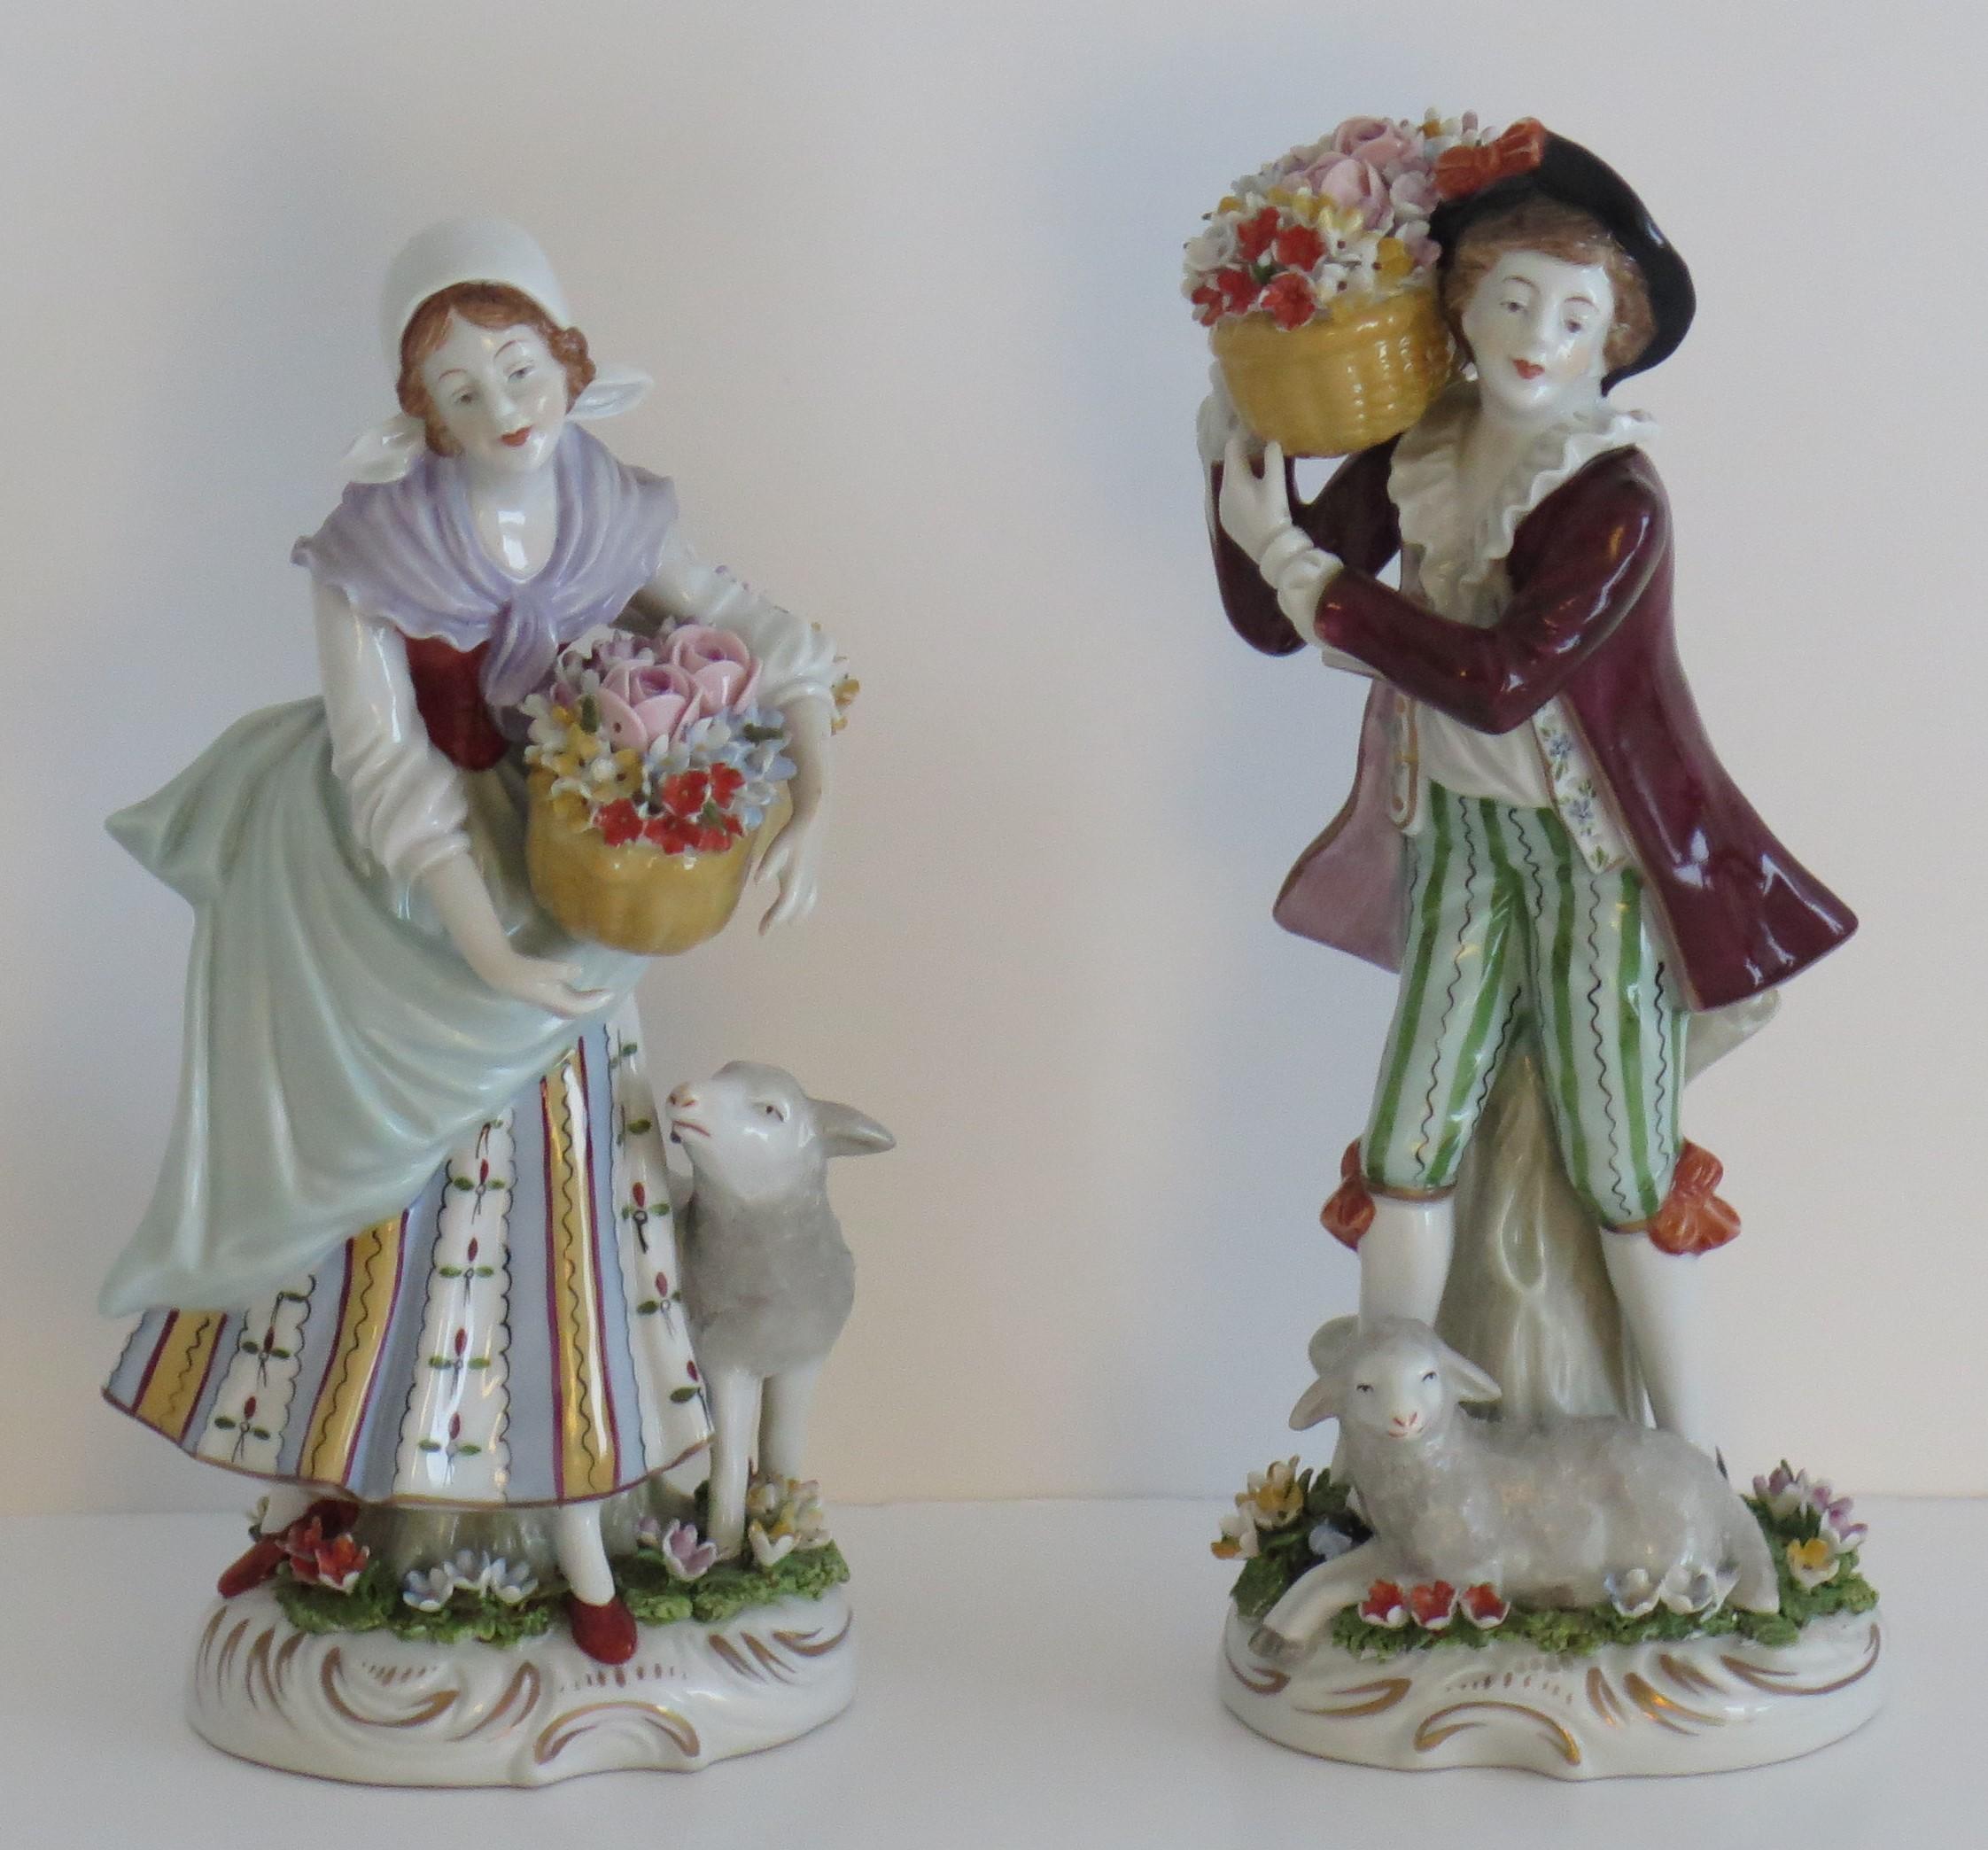 These are a beautiful PAIR of porcelain Figures or Figurines made by Sitzendorf, Germany, circa 1920.

The figures are finely modelled in very good detail. They depict two flower sellers with a young man and woman in traditional country dress